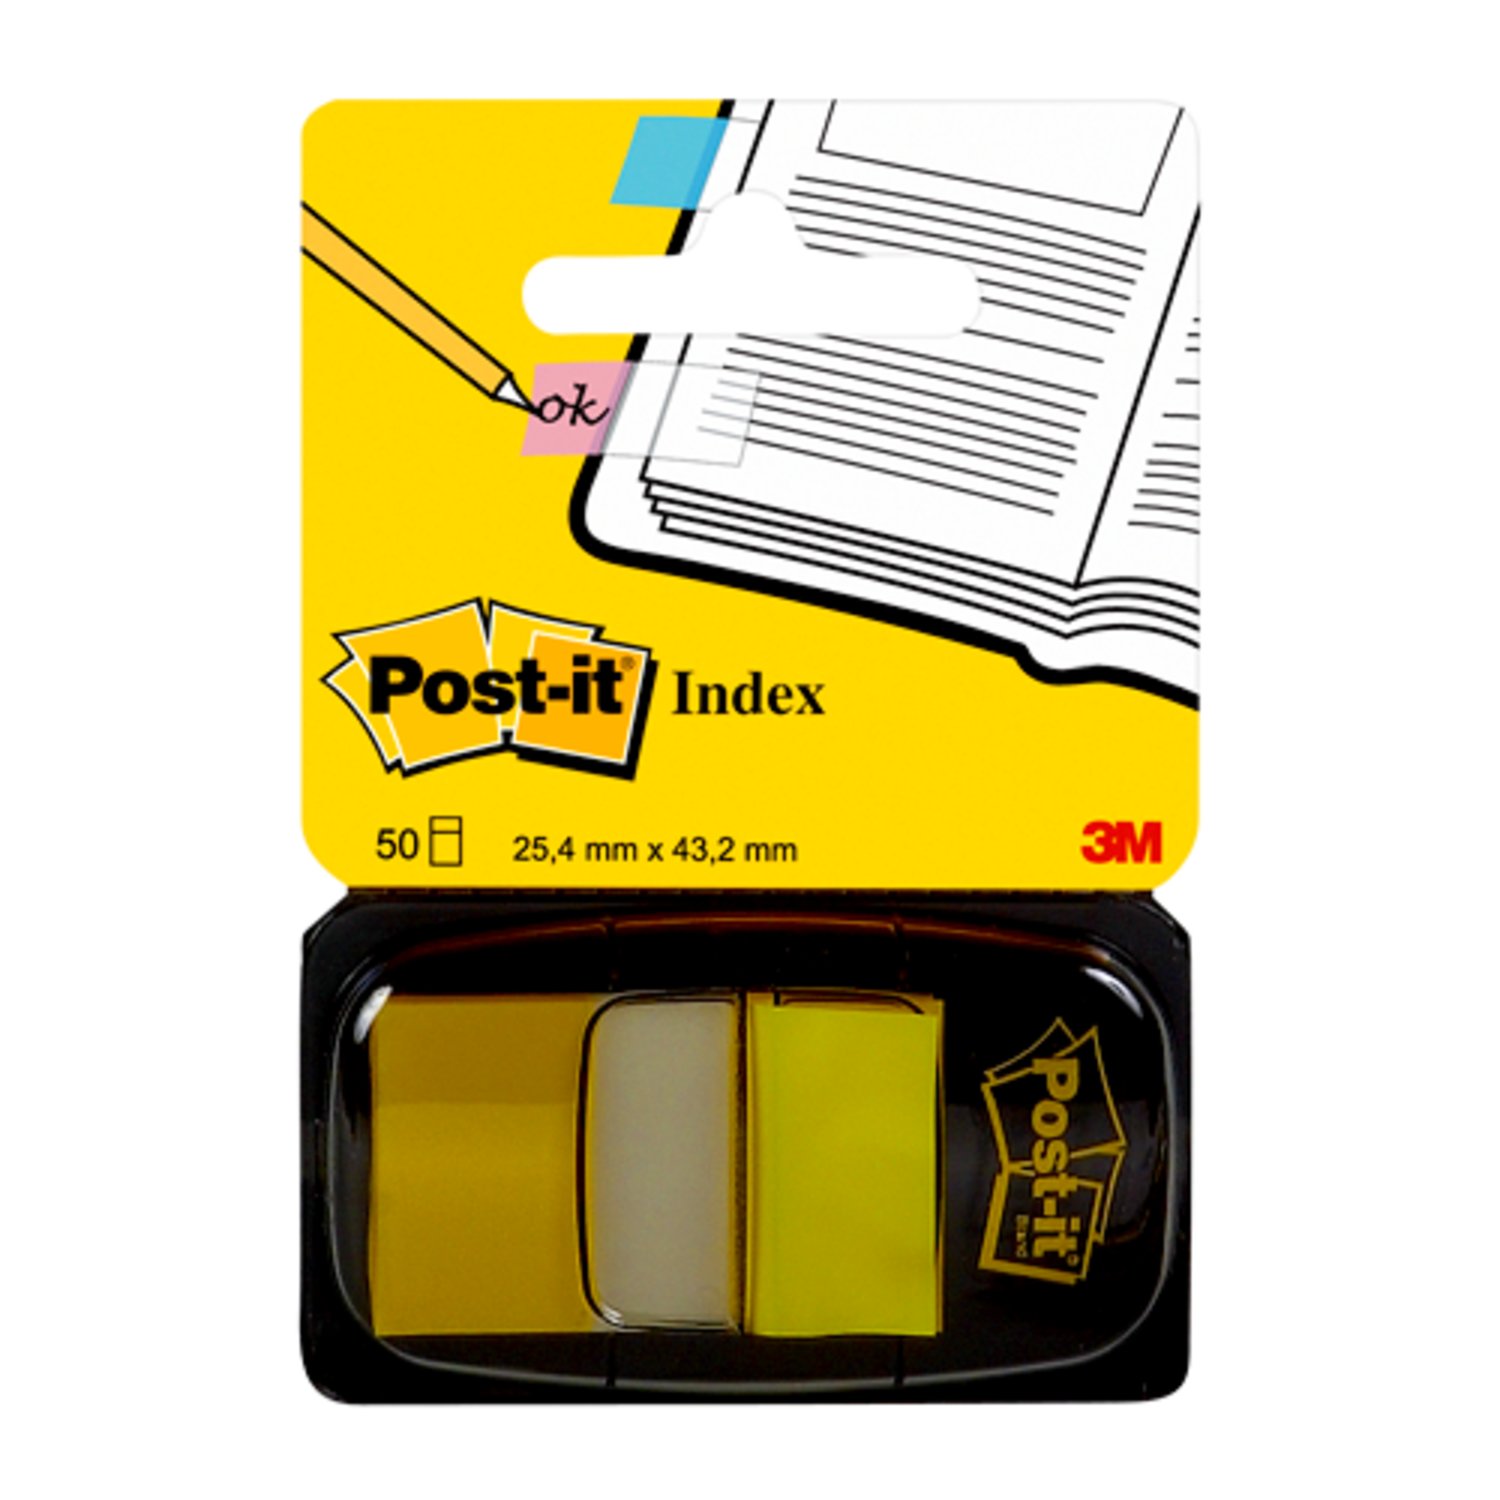 7000042522 - Post-it Flags 680-5 (36), 1 in x 1.7 in (25,4 mm x 43,2 mm) Canary
Yellow 50 flags/pd 36/cs